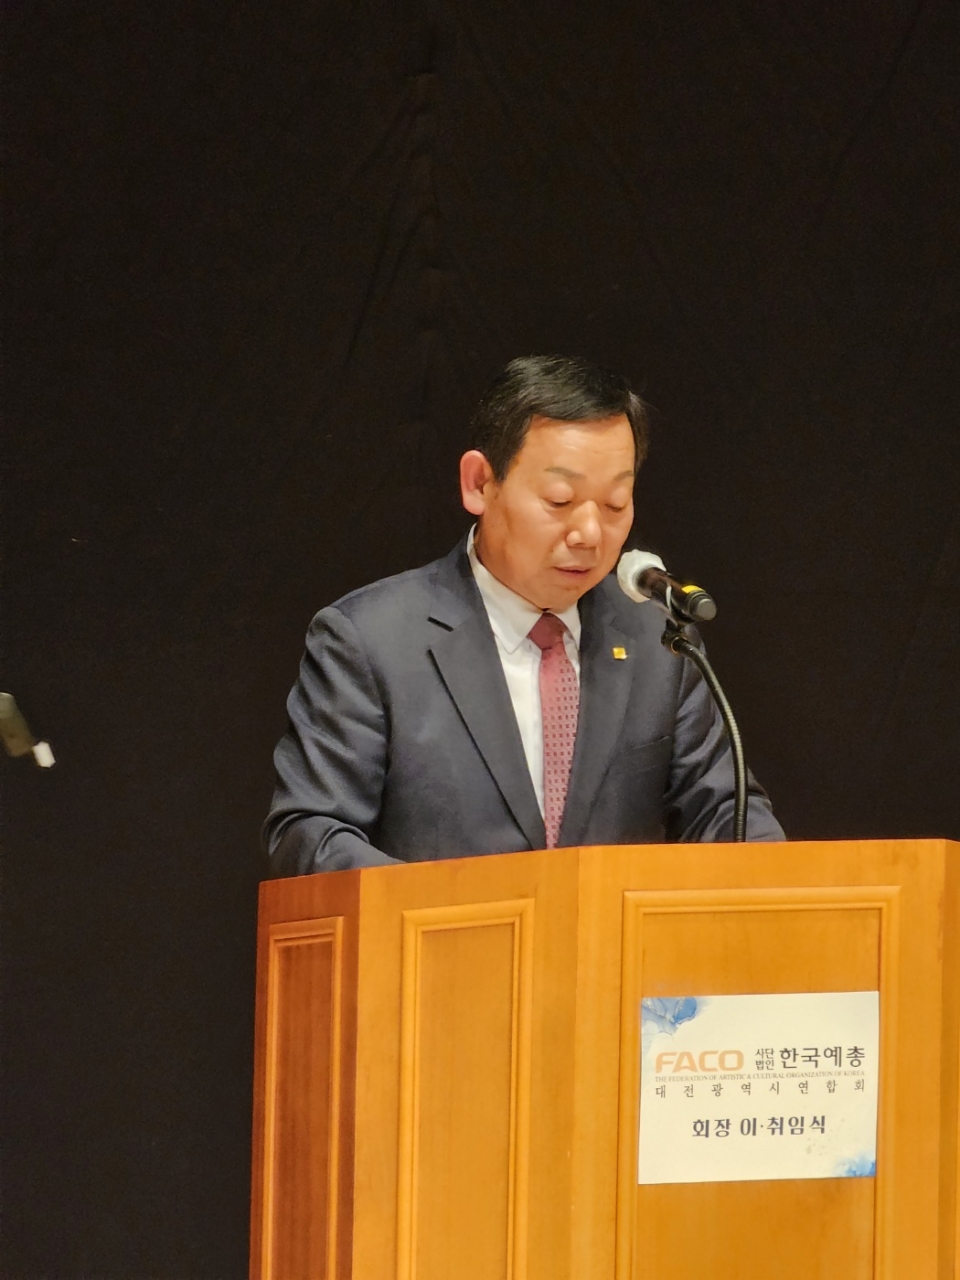 Seong Nak-won presents four visions for Daejeon's cultural development as the new chairman of Daejeon Yechong